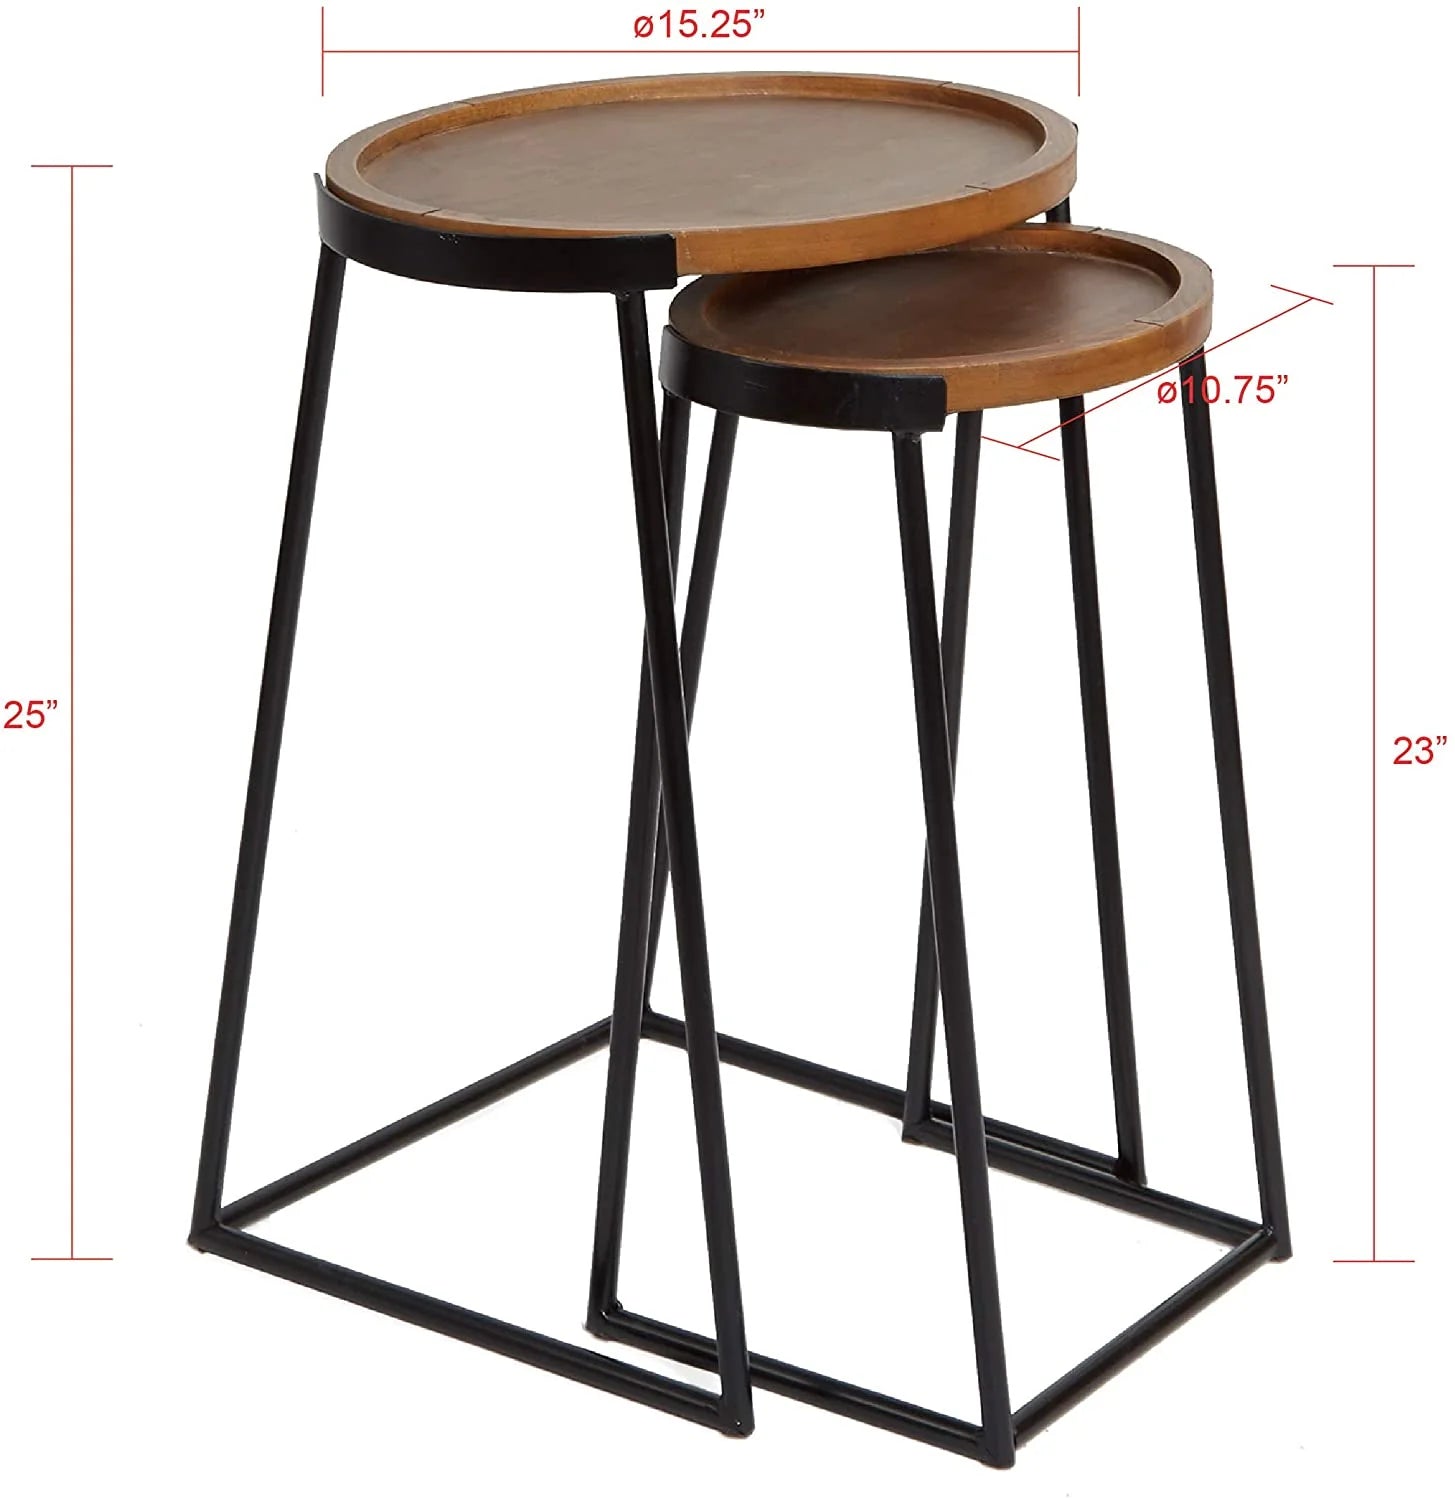 Nest Of Tables: Silverwood Nesting Side Table, Black Metal and Dark Wood